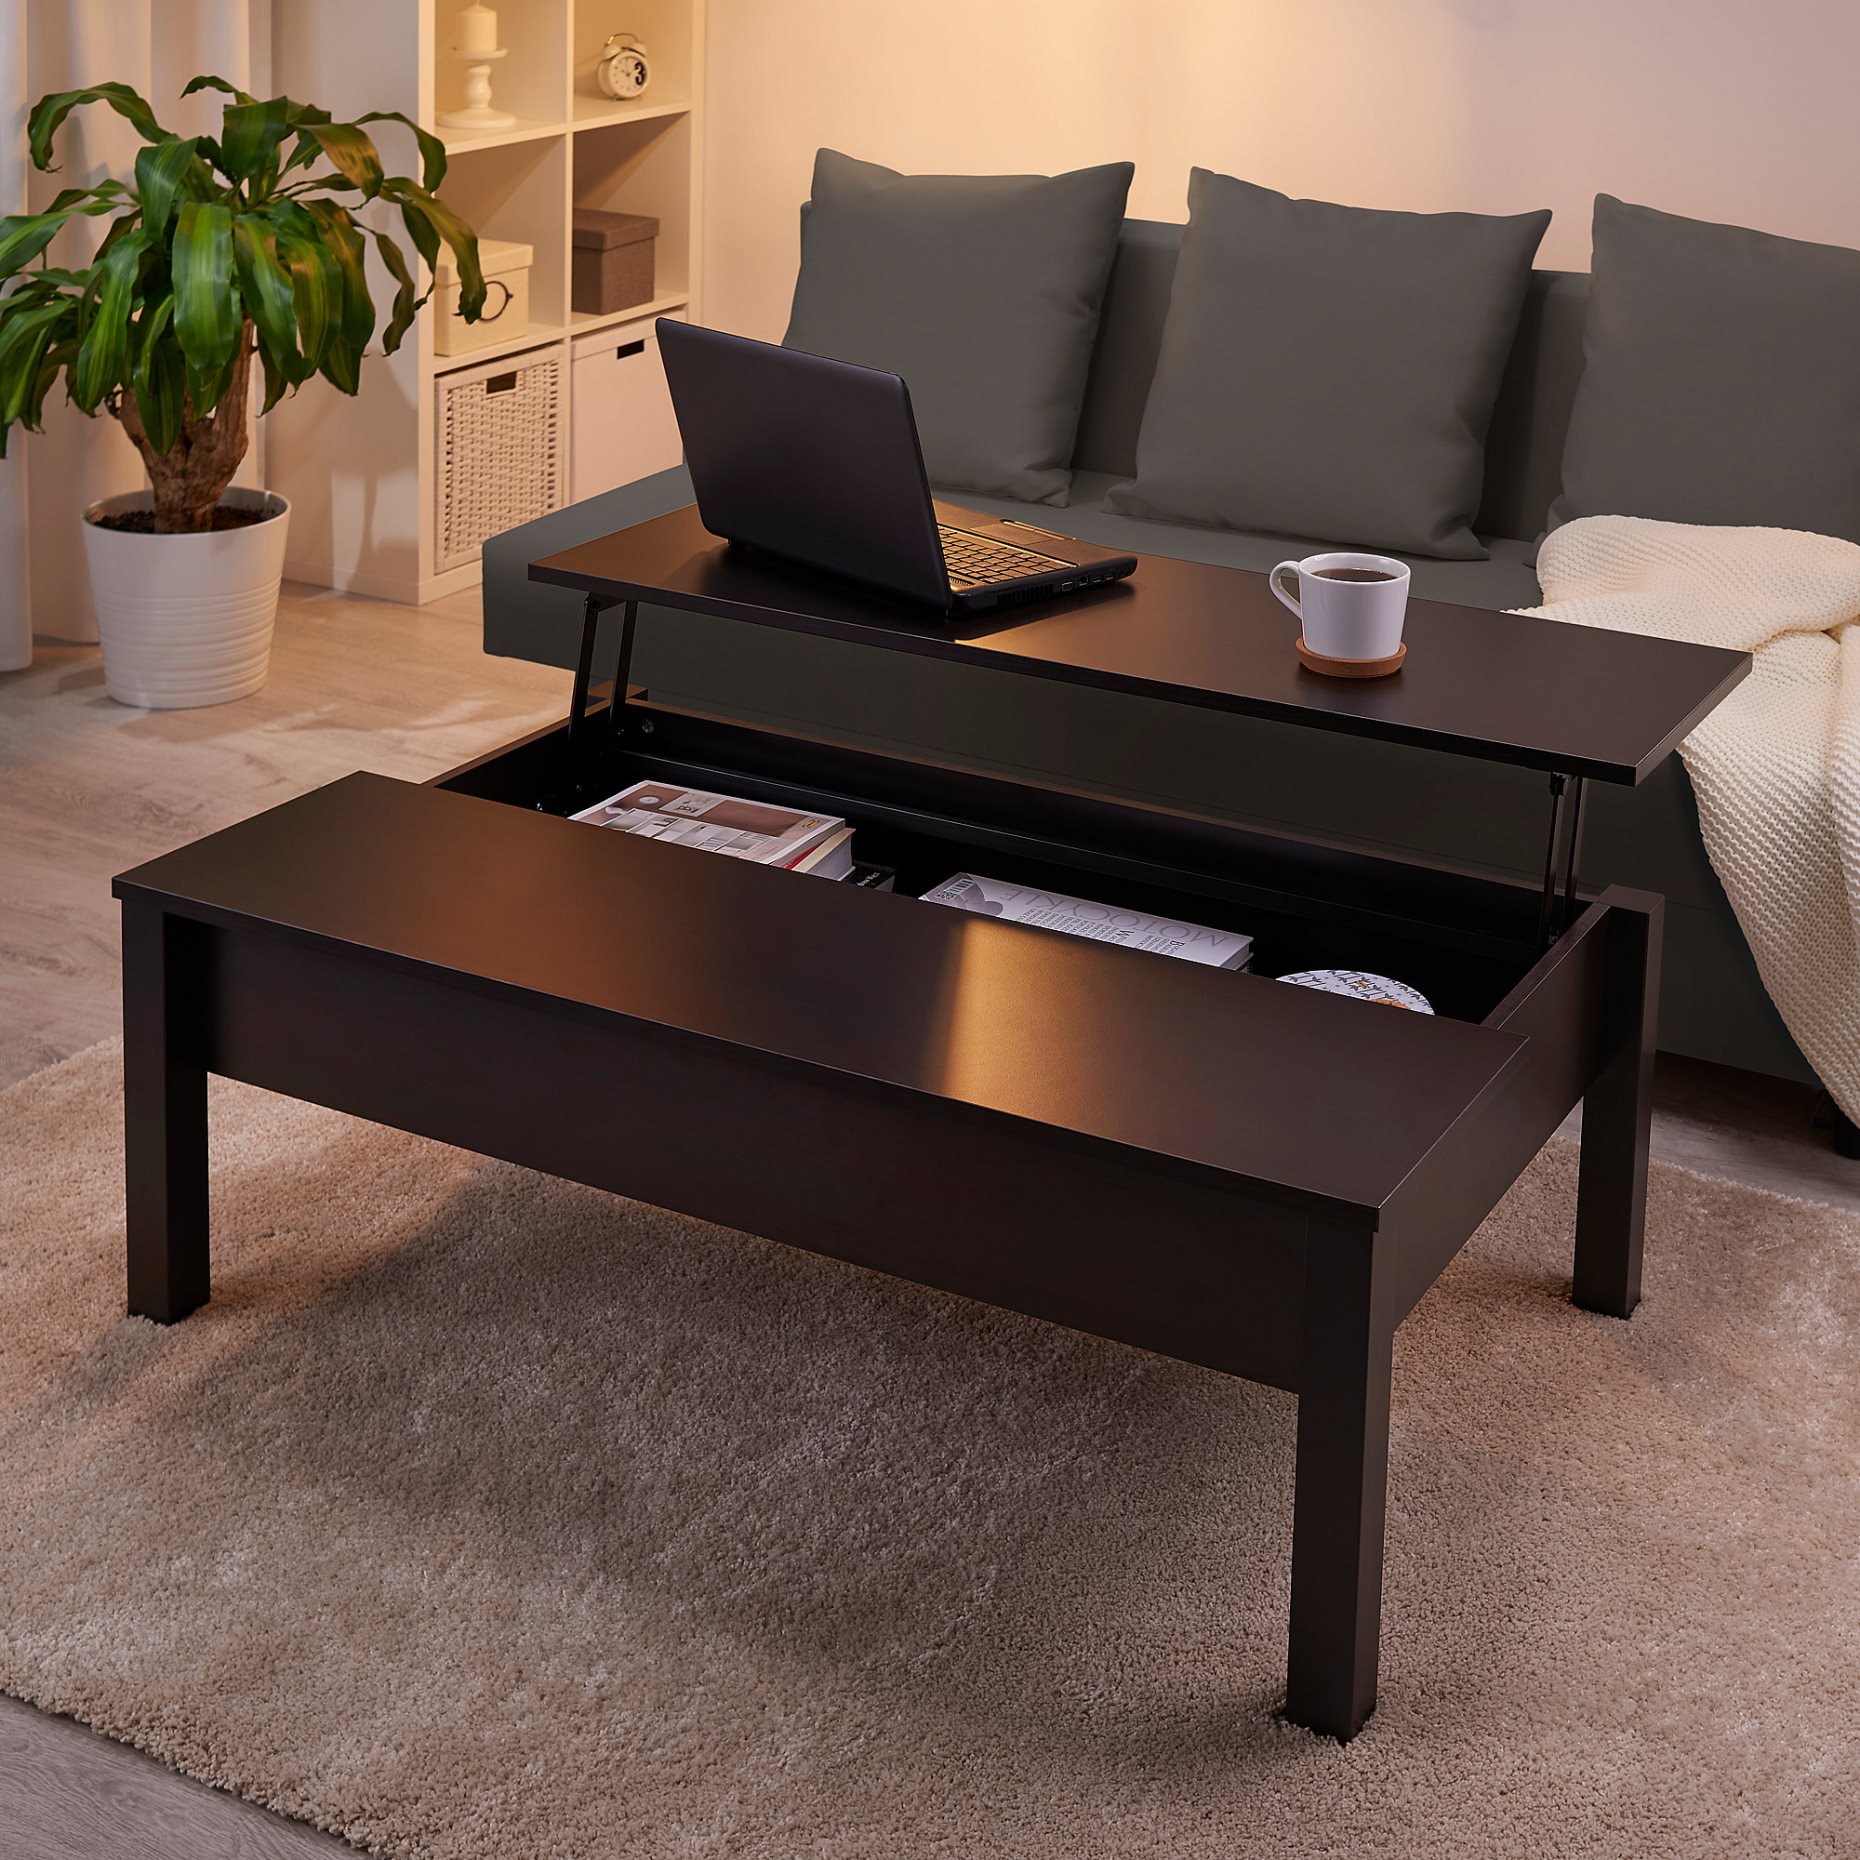 TRULSTORP, coffee table, 004.002.77